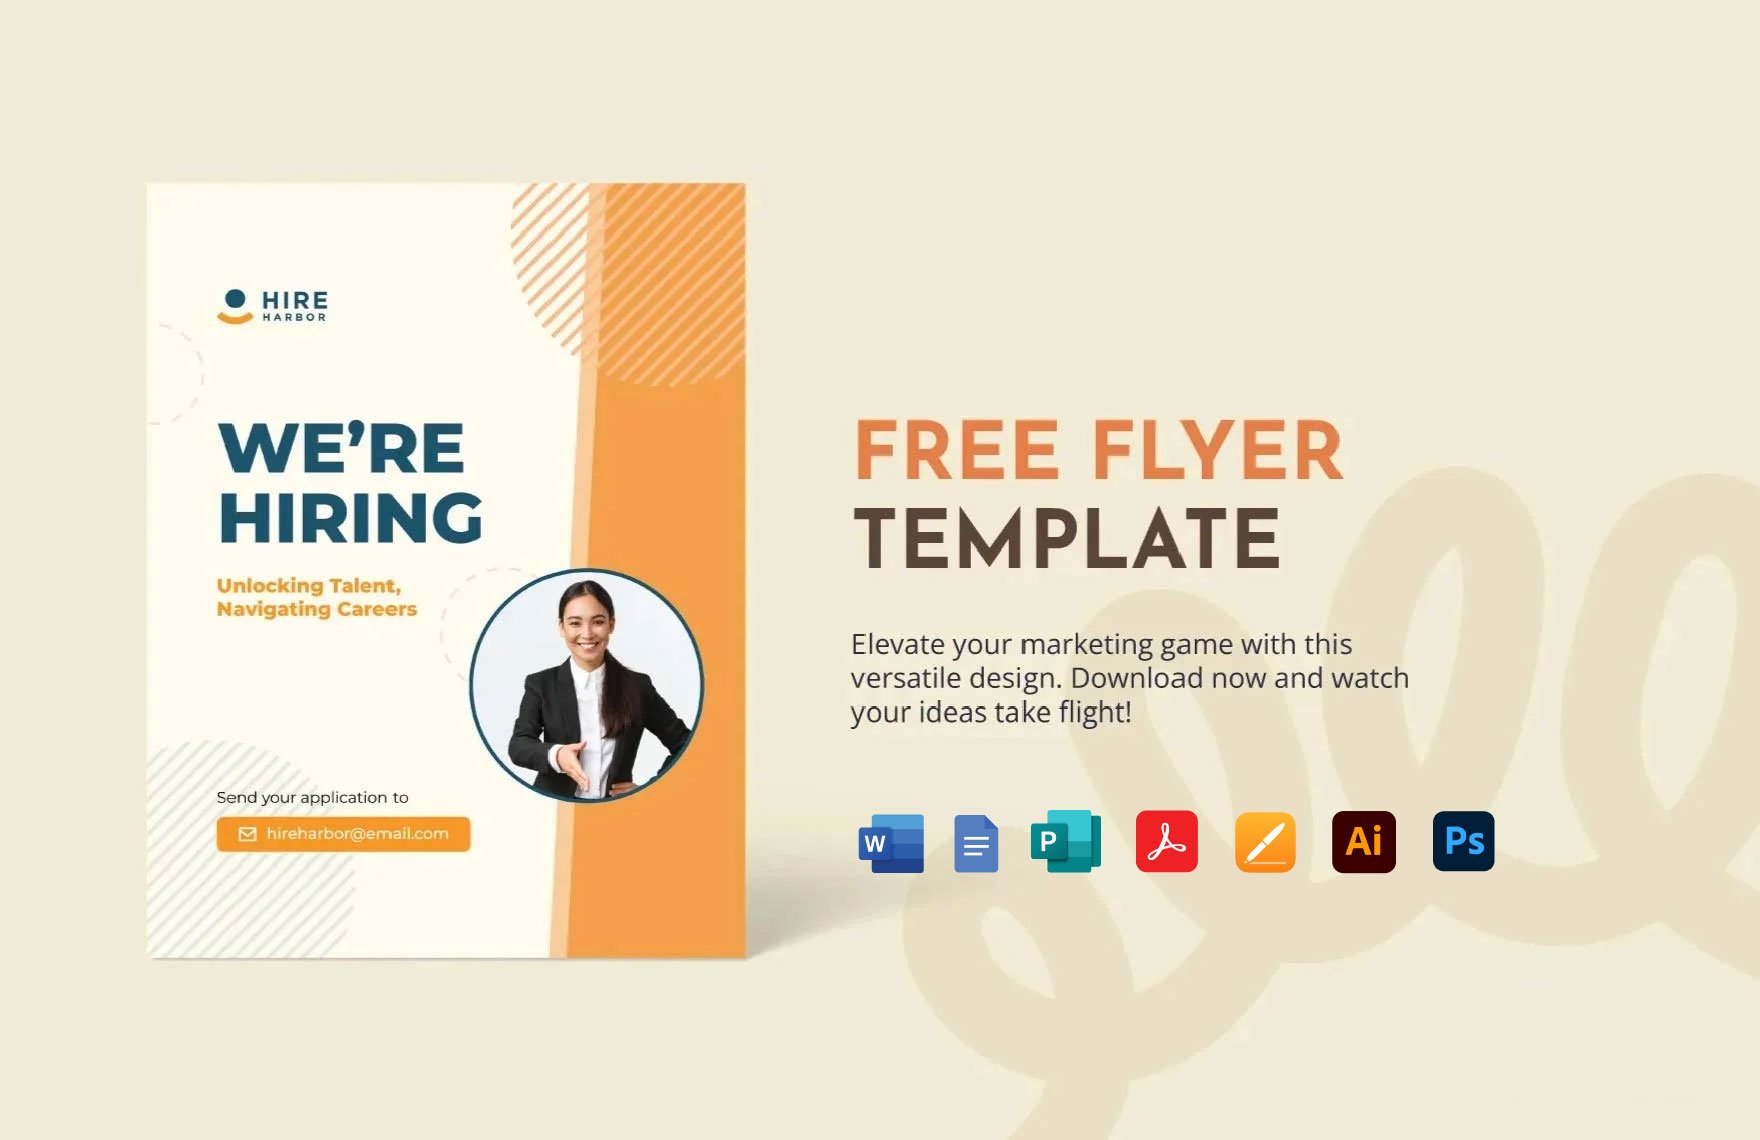 Learn Fly PSD, 2,000+ High Quality Free PSD Templates for Download